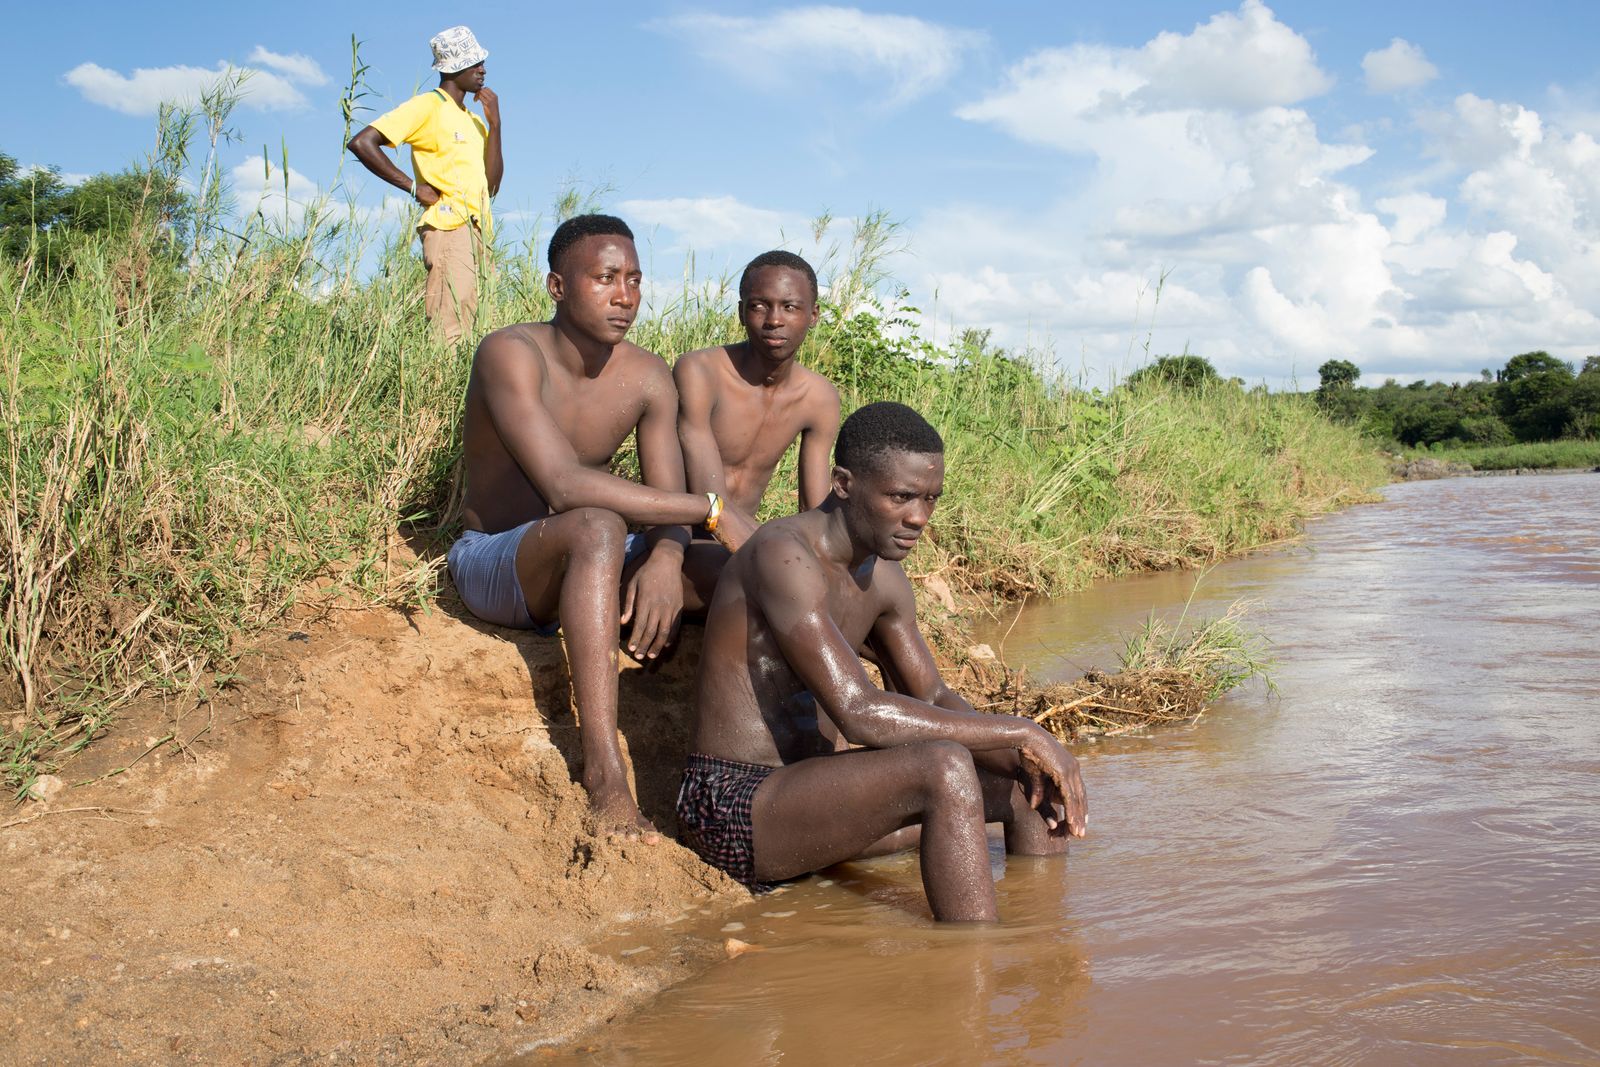 © Giya Makondo-Wills - Image from the THEY CAME from the water while the world watched photography project